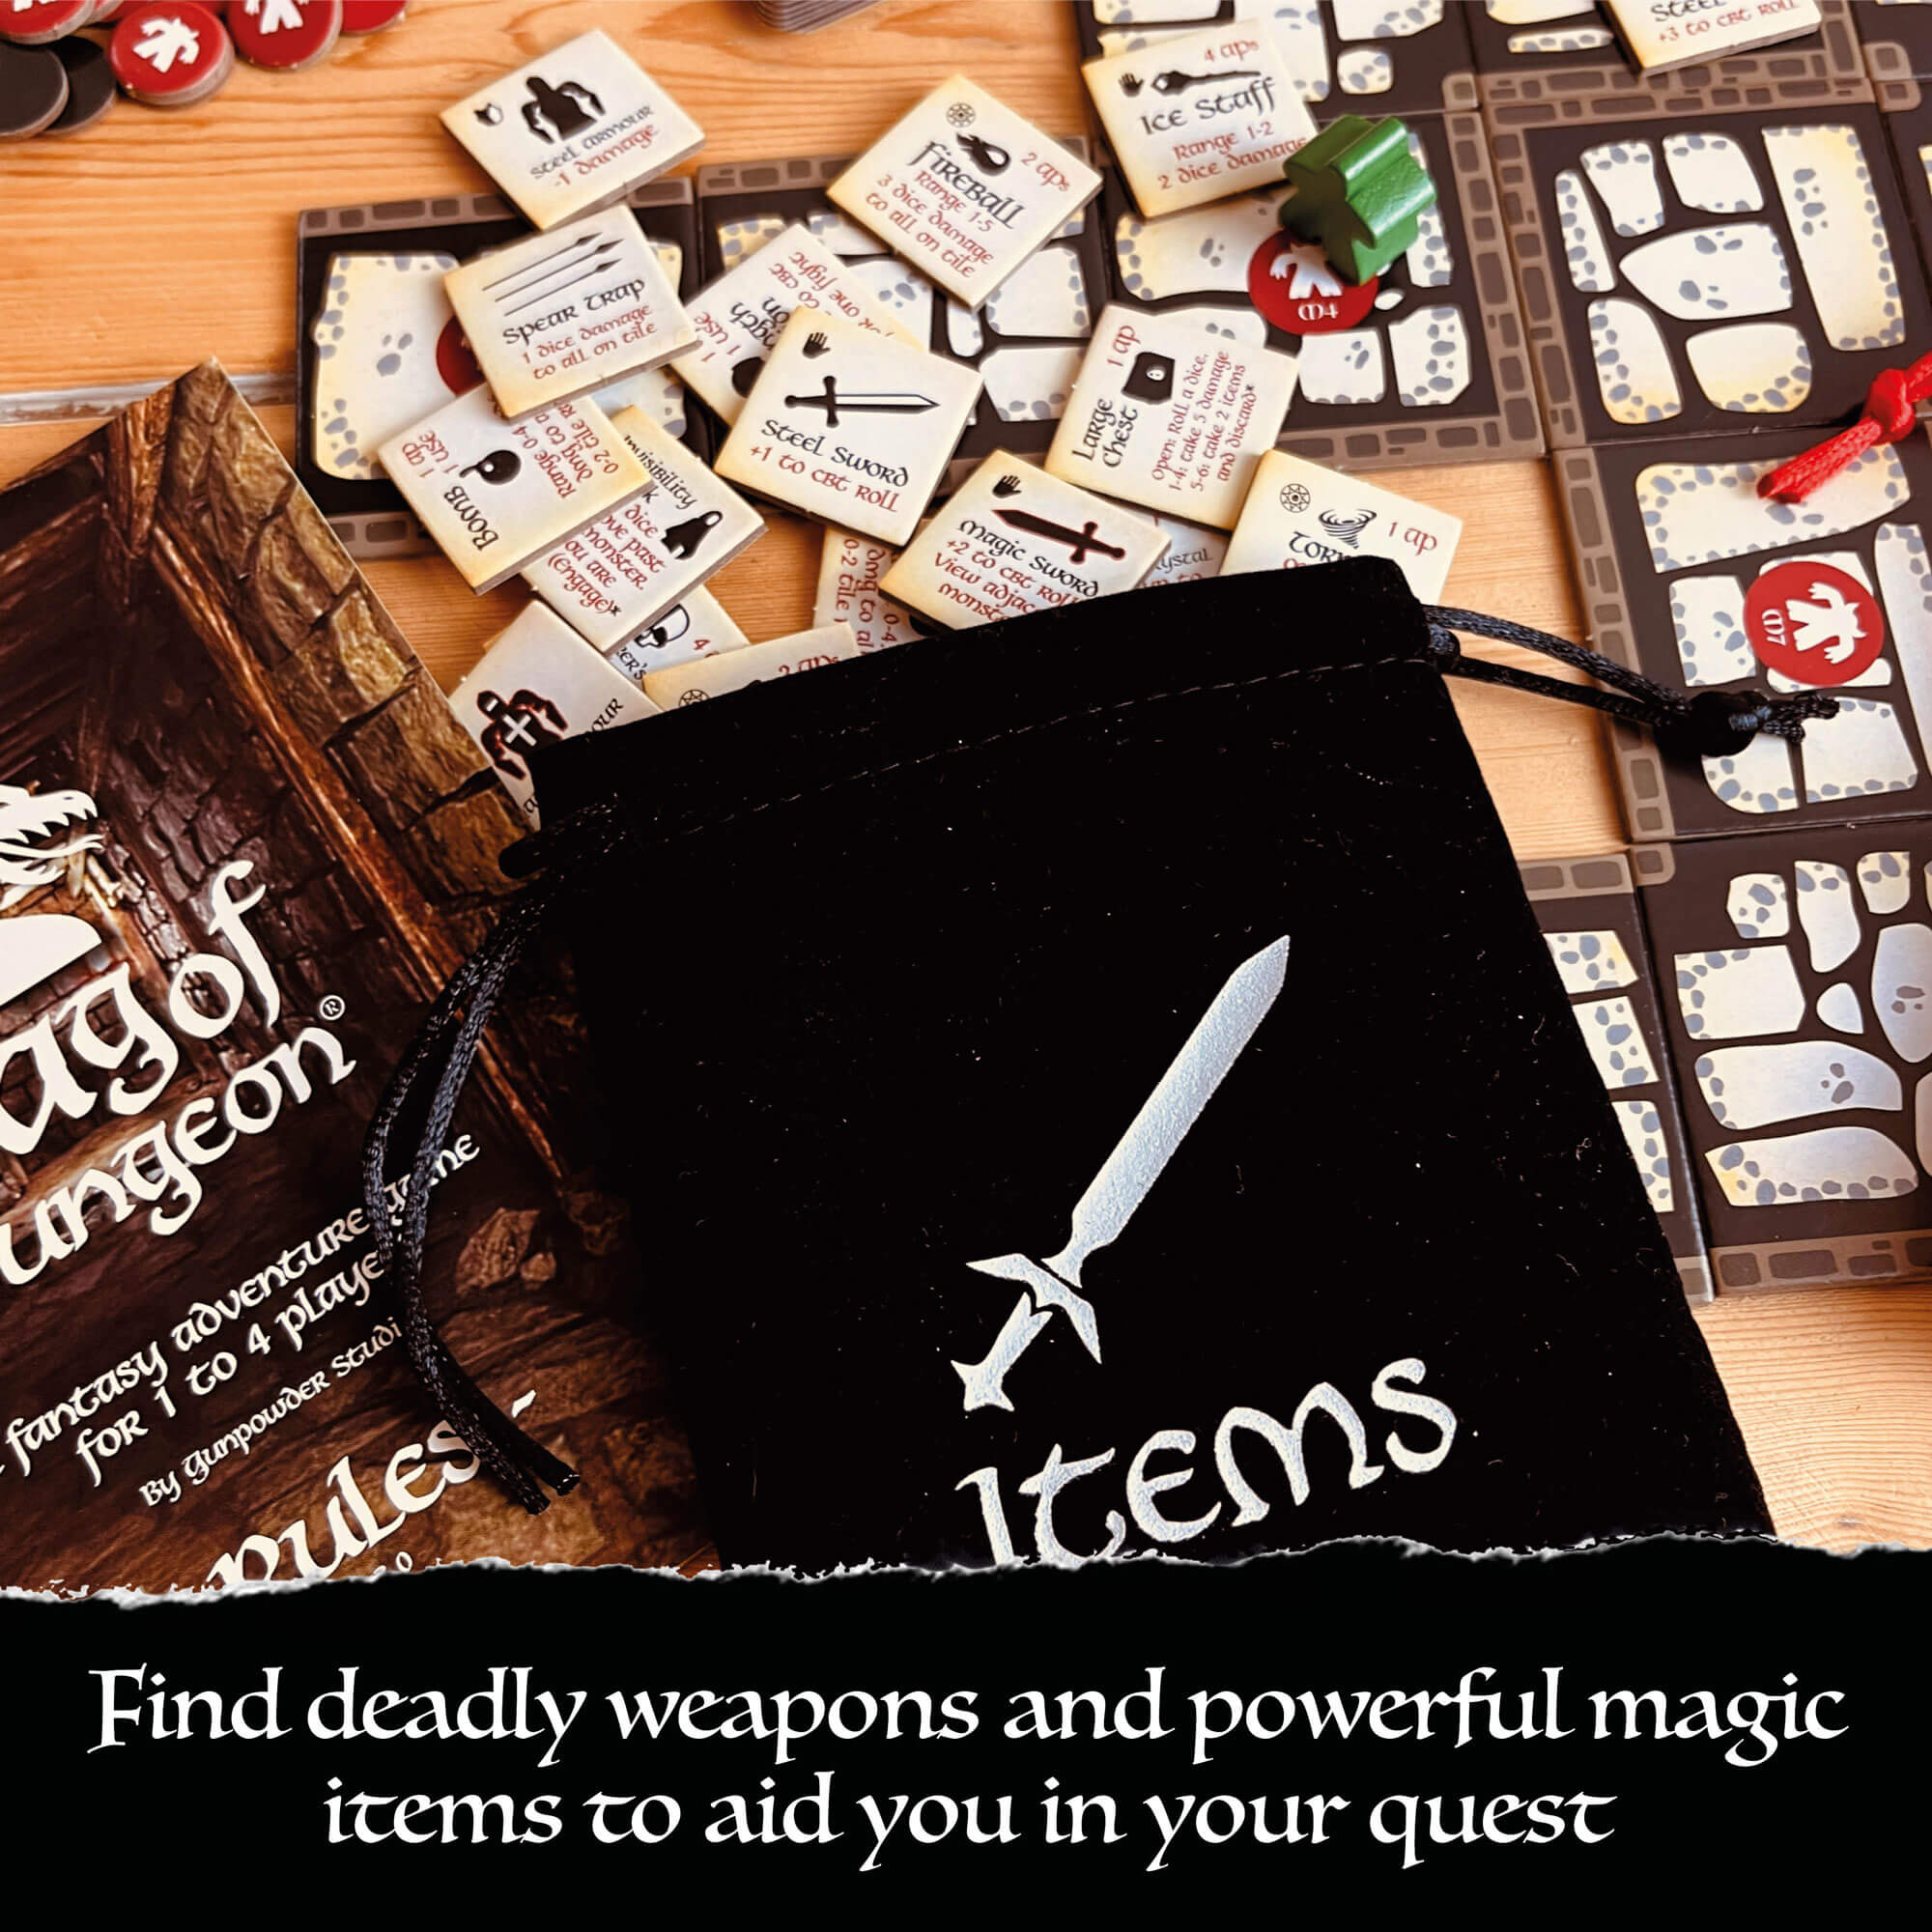 Find deadly weapons and powerful magic items to aid you in your quest